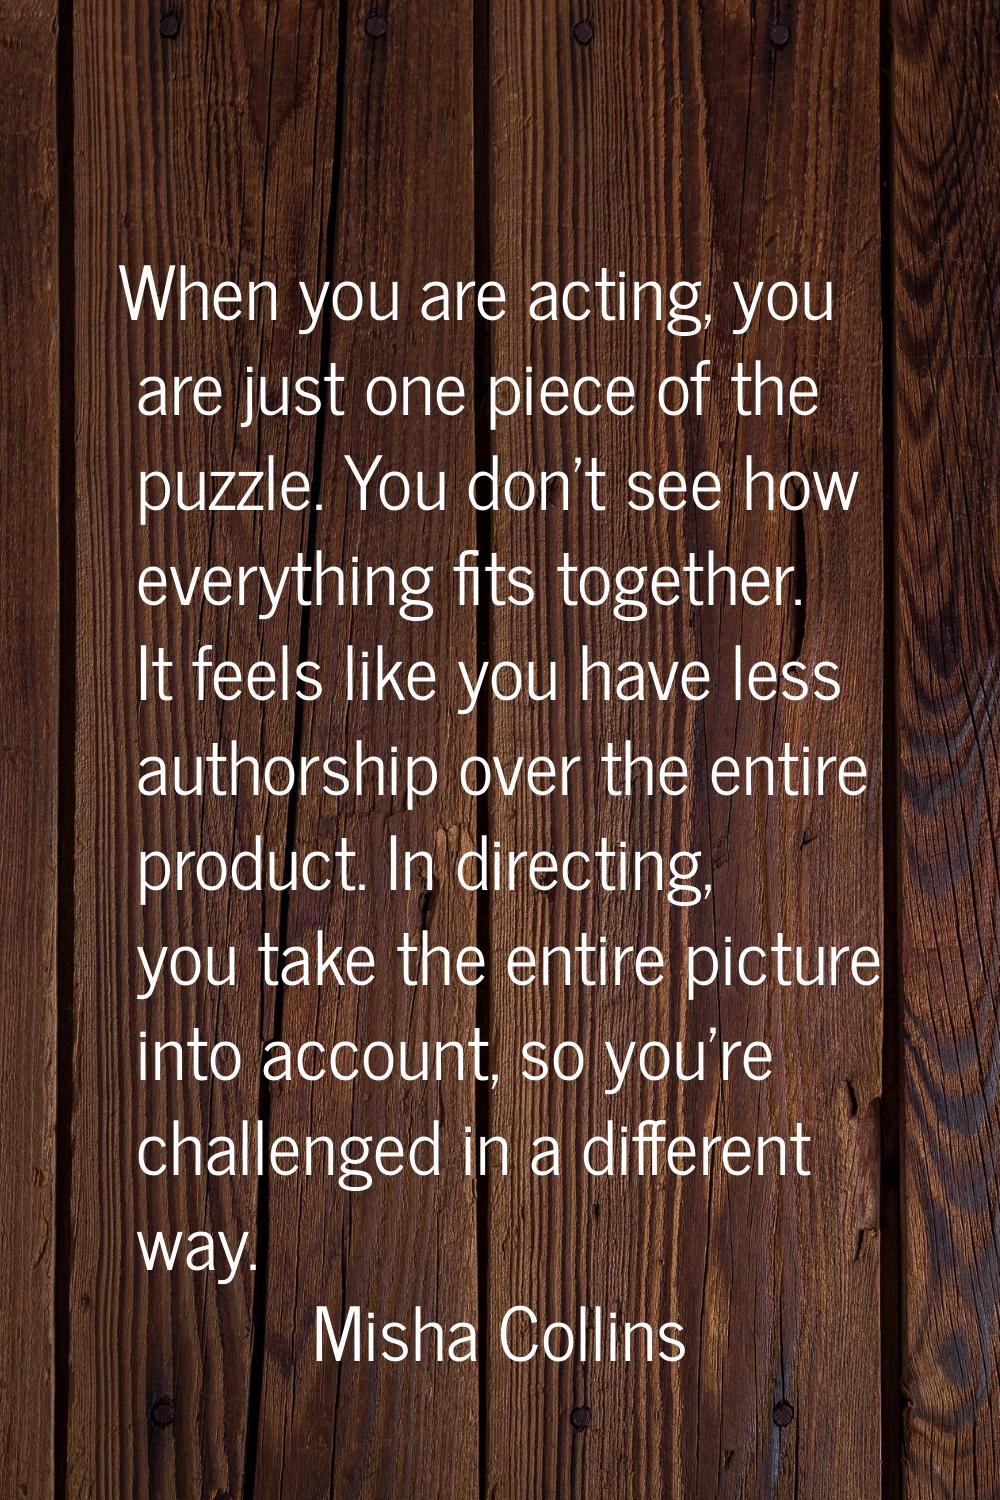 When you are acting, you are just one piece of the puzzle. You don't see how everything fits togeth